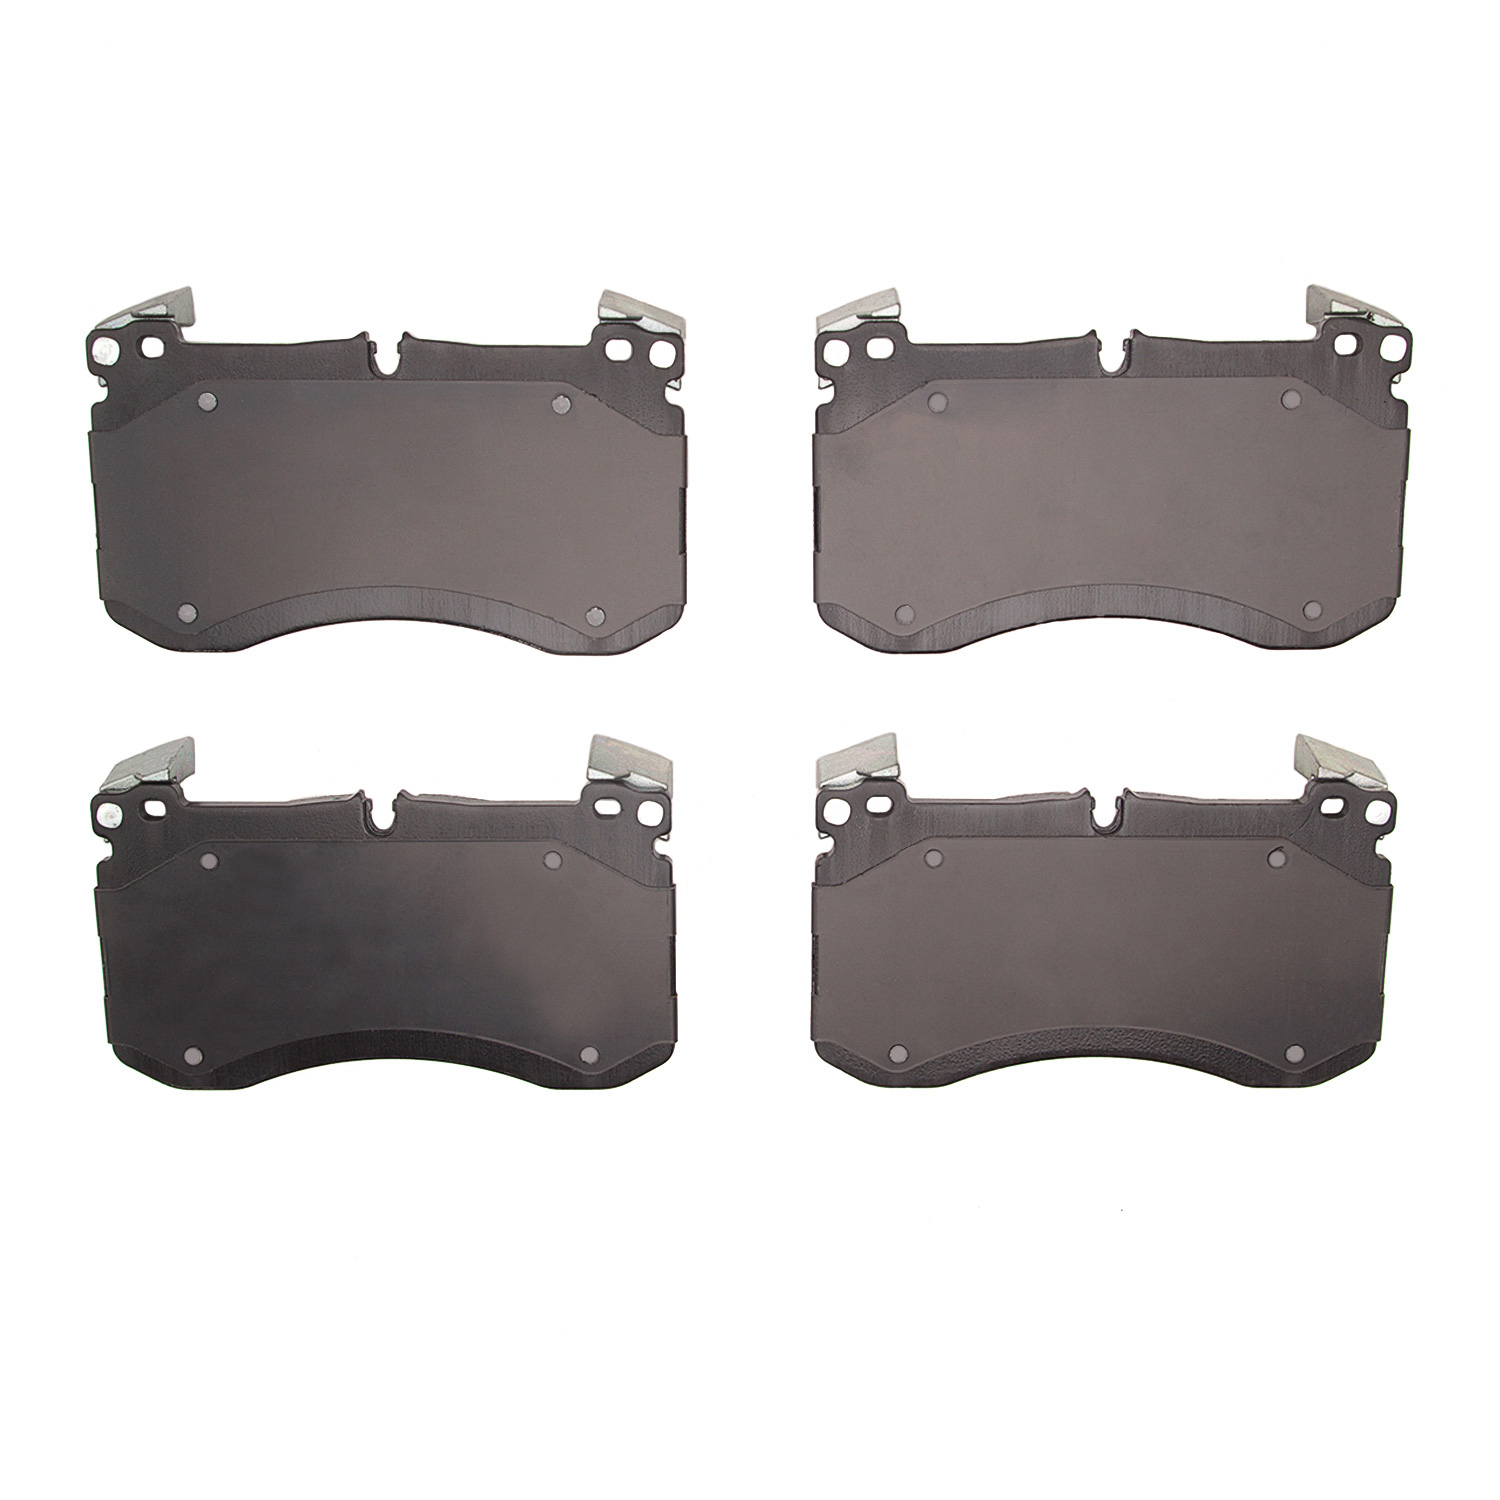 Optimum OE Brake Pads, Fits Select Mercedes-Benz, Position: